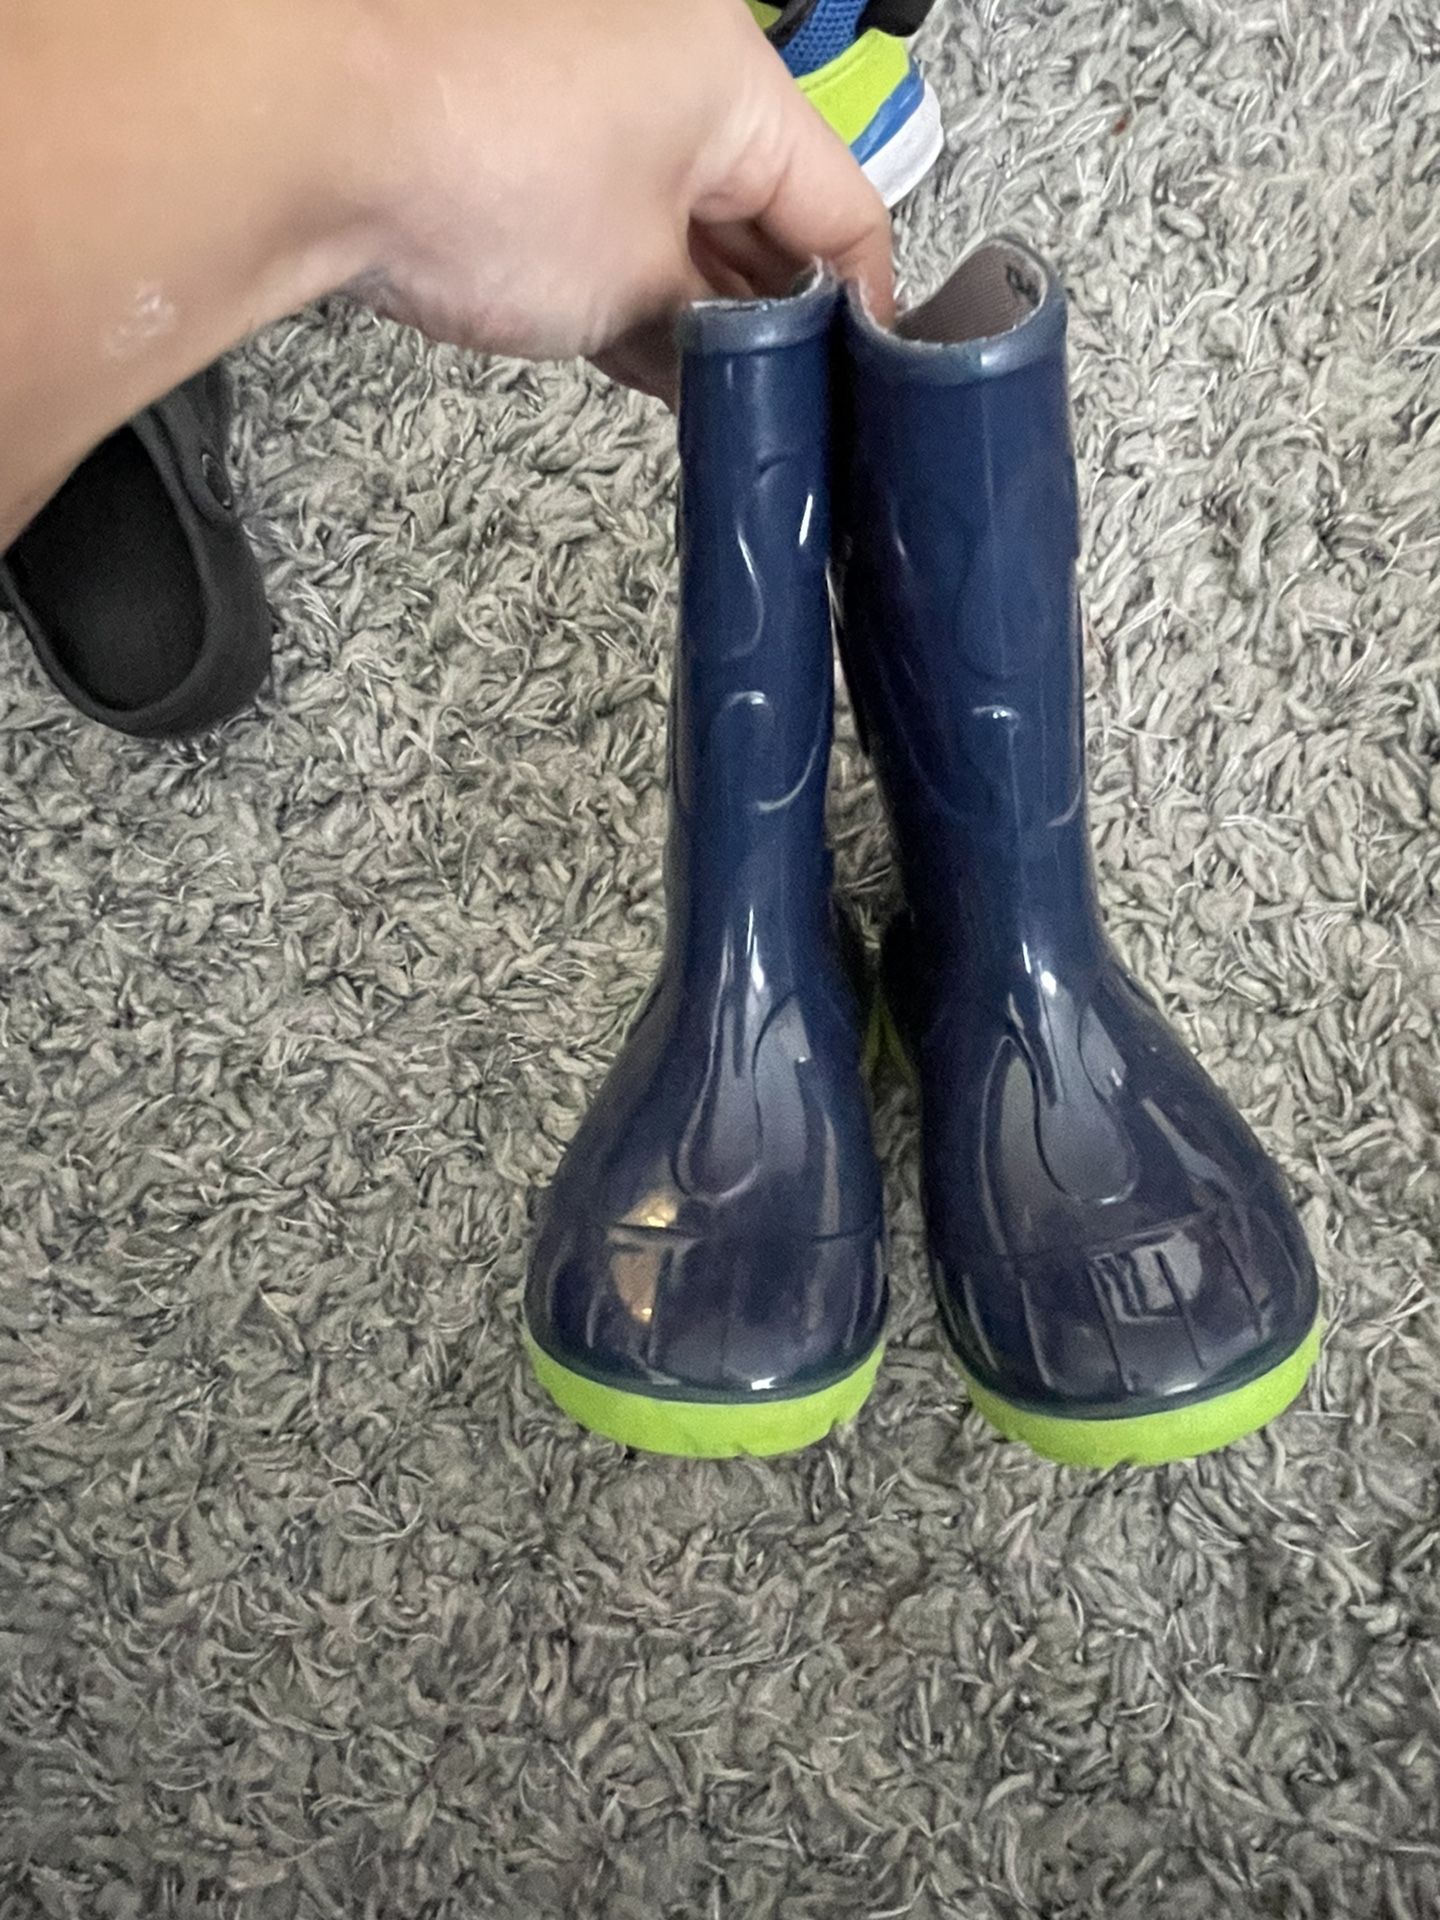 Toddler Rain Boots , Size 24 European , US Size 8-9, Used